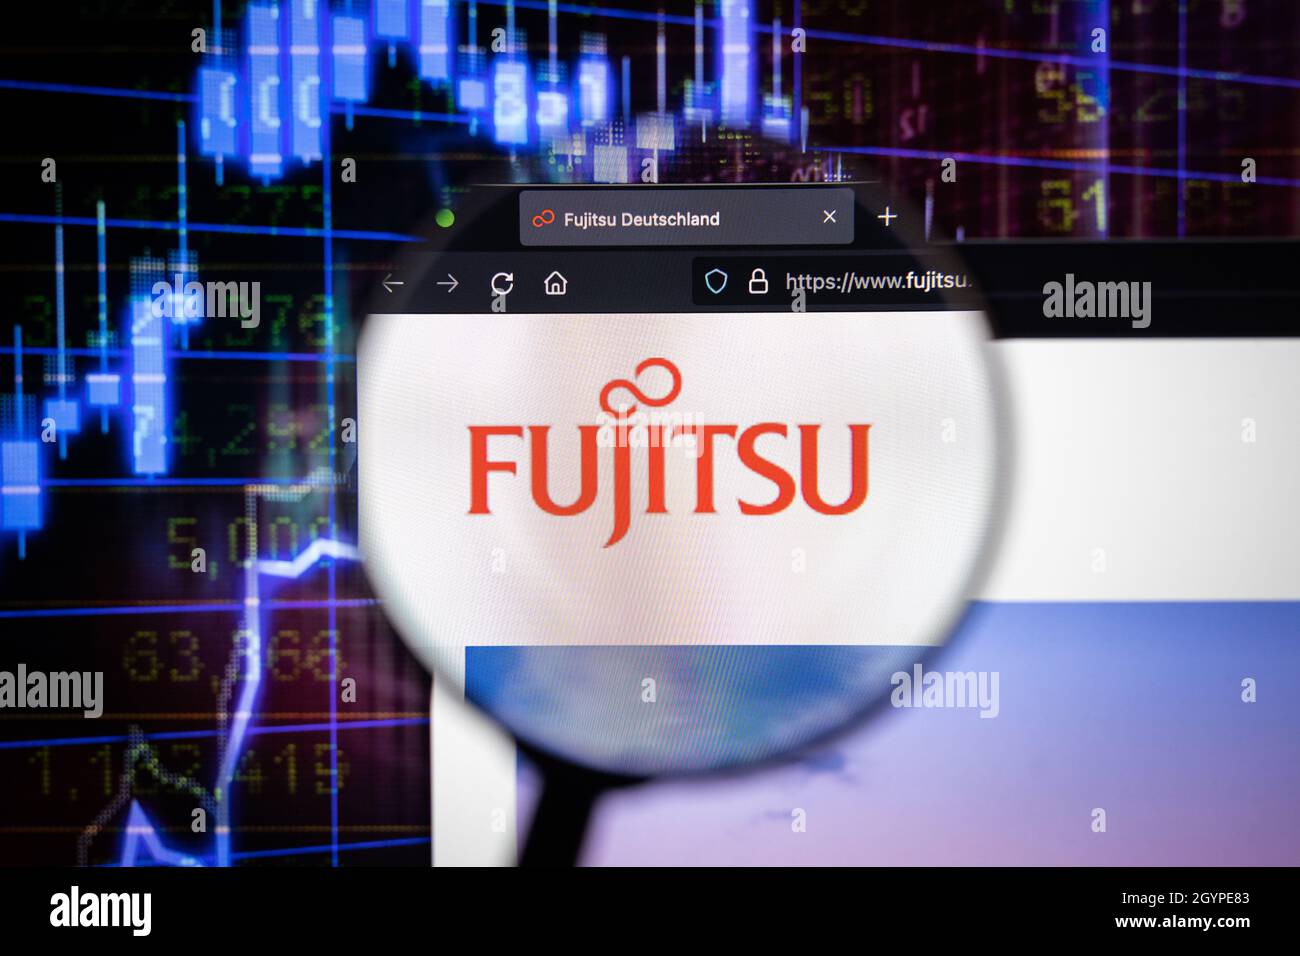 Fujitsu company logo on a website with blurry stock market graphs in the background, seen on a computer screen through a magnifying glass. Stock Photo